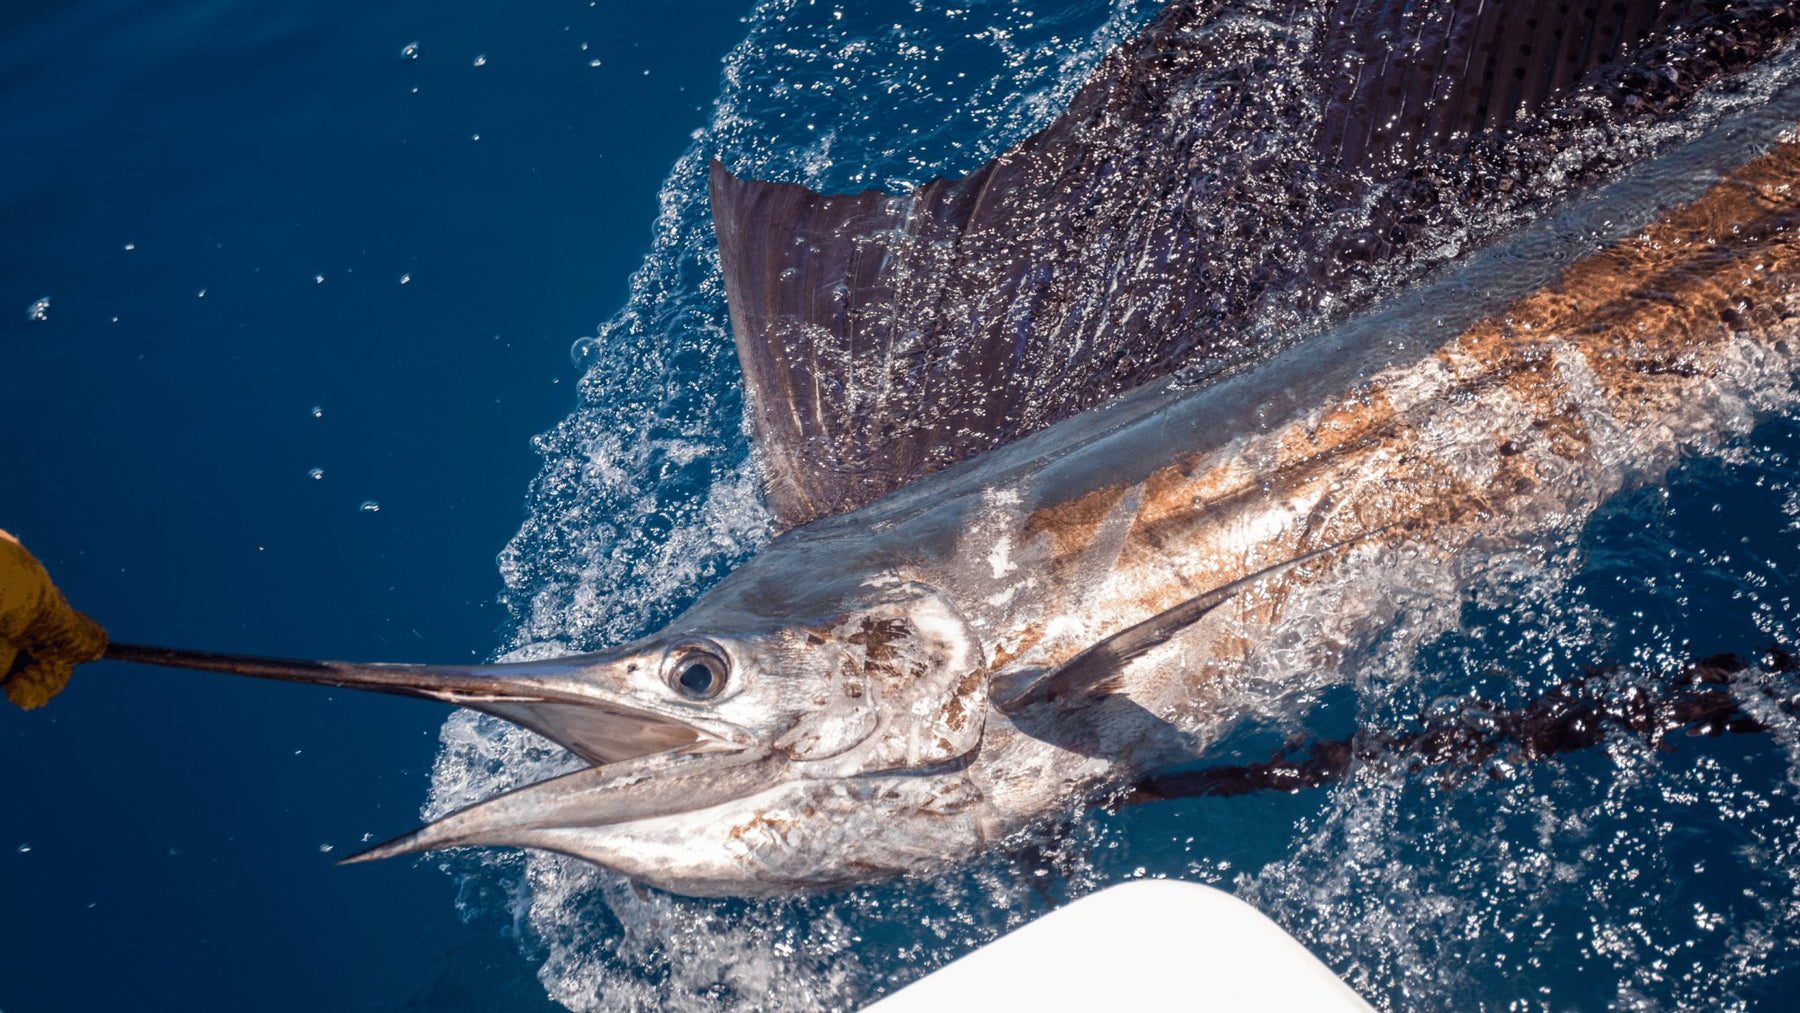 Sailfish leaps out of water, injures woman off Florida coast - FishAndSave